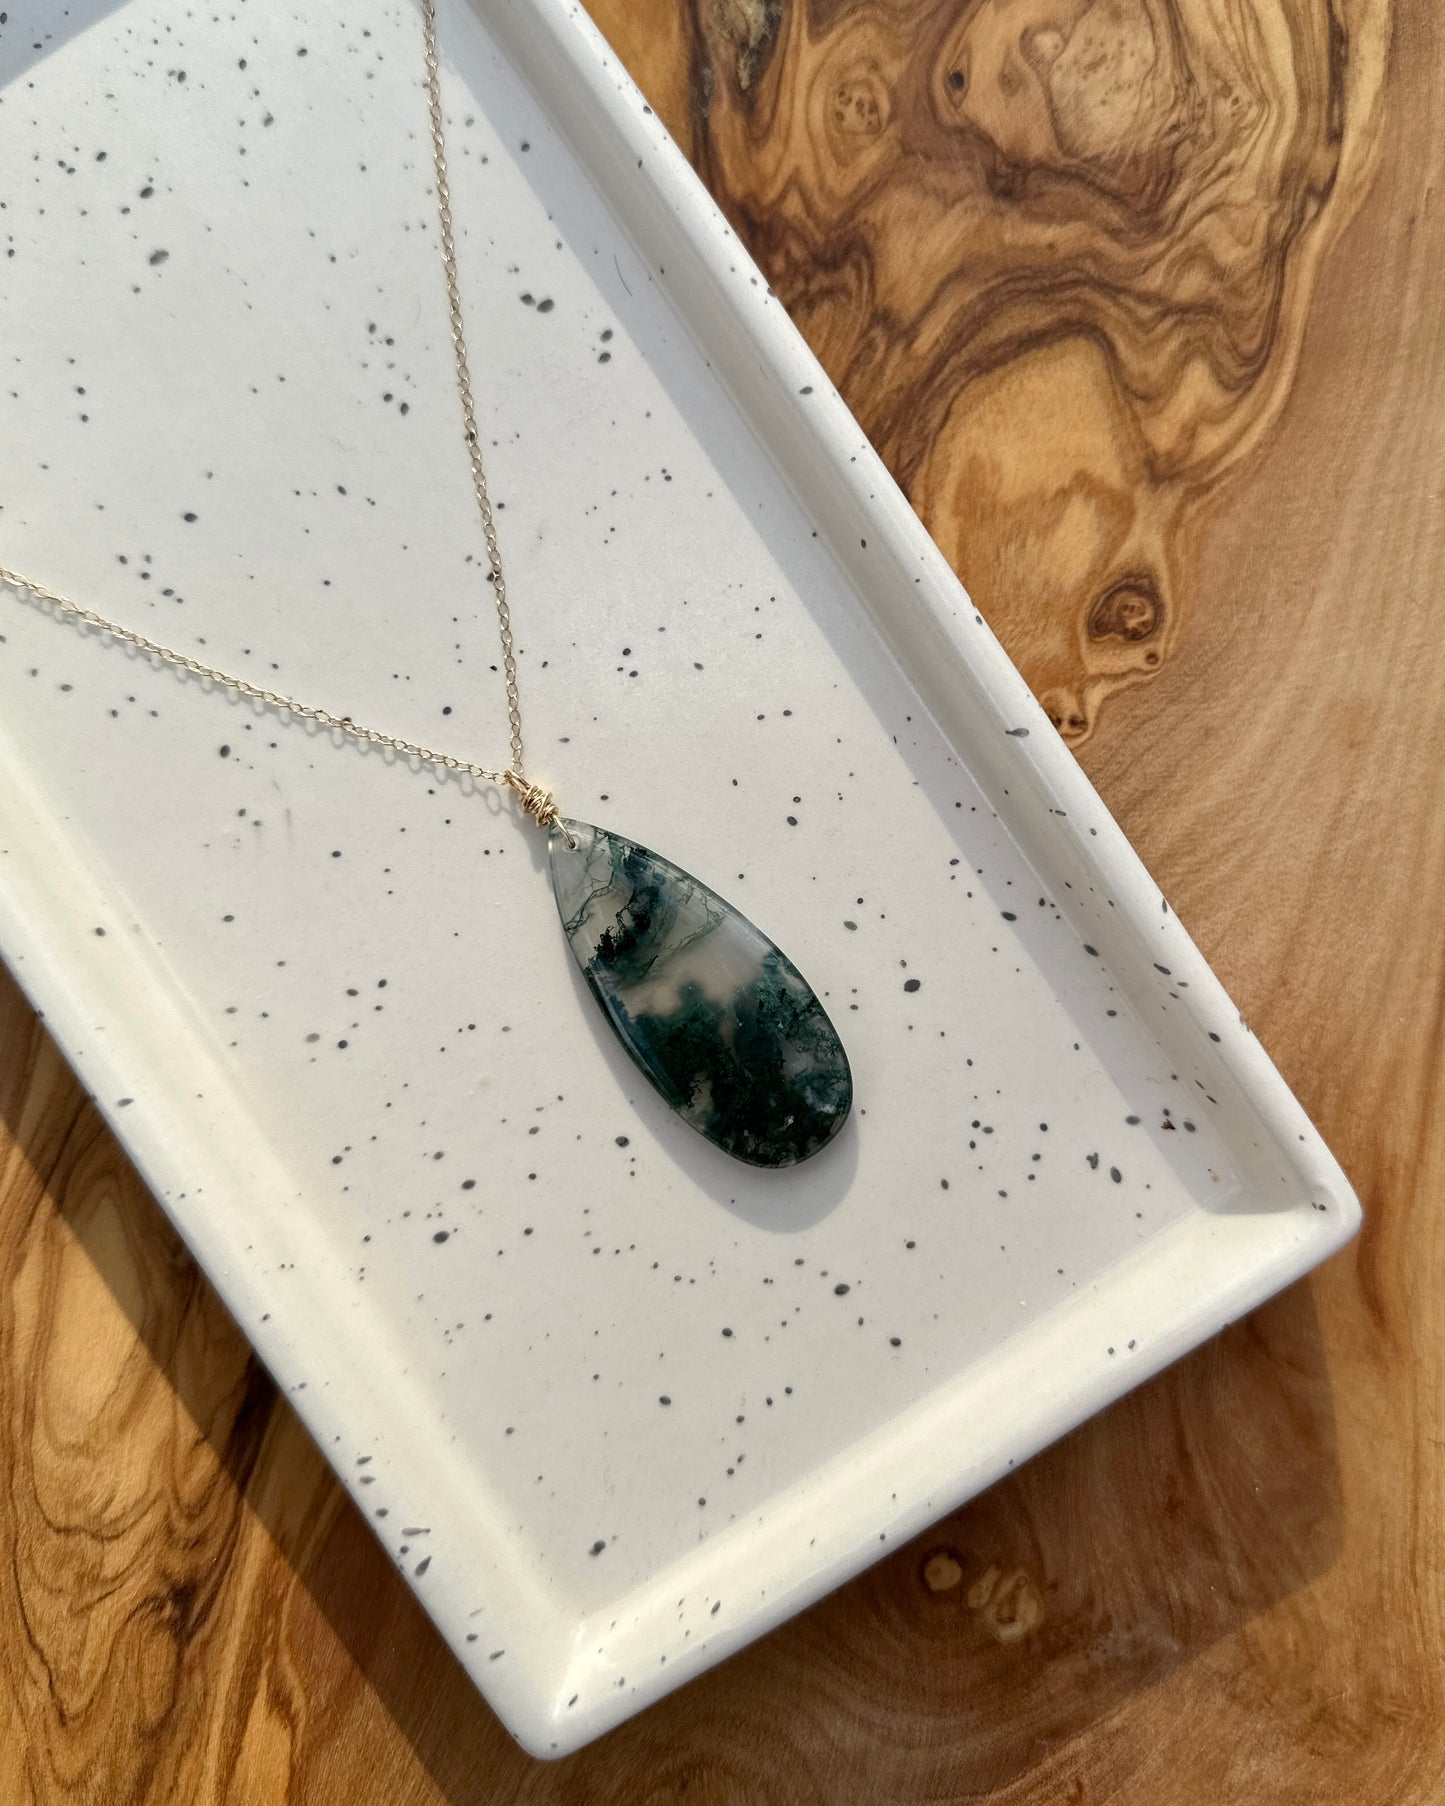 Moss Agate Gold Filled Necklace